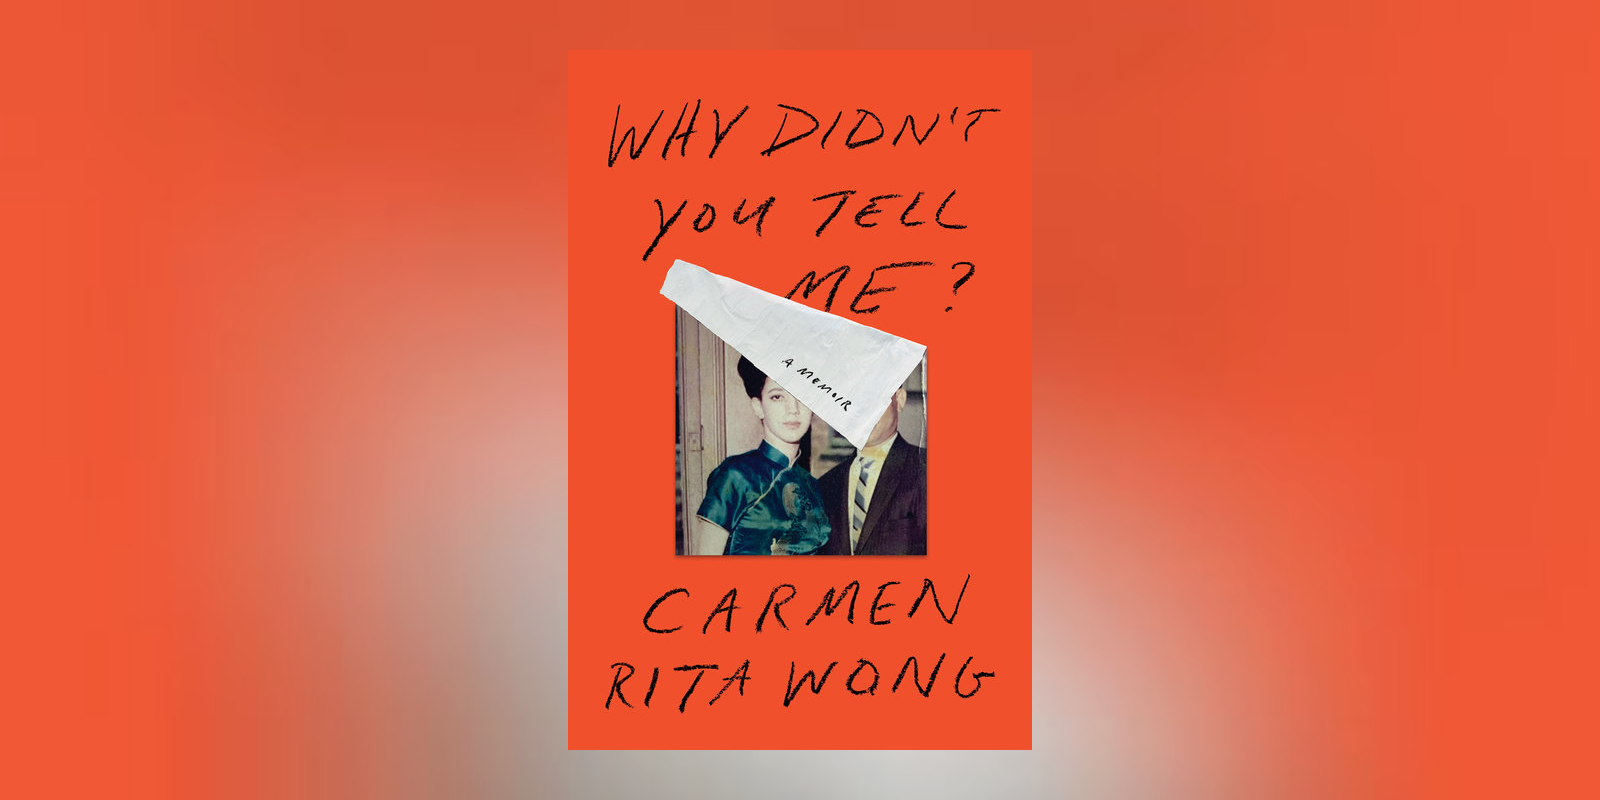 Carmen Rita Wong, author of <i>Why Didn’t You Tell Me?</i>, on Identity, Race, Culture & Belonging